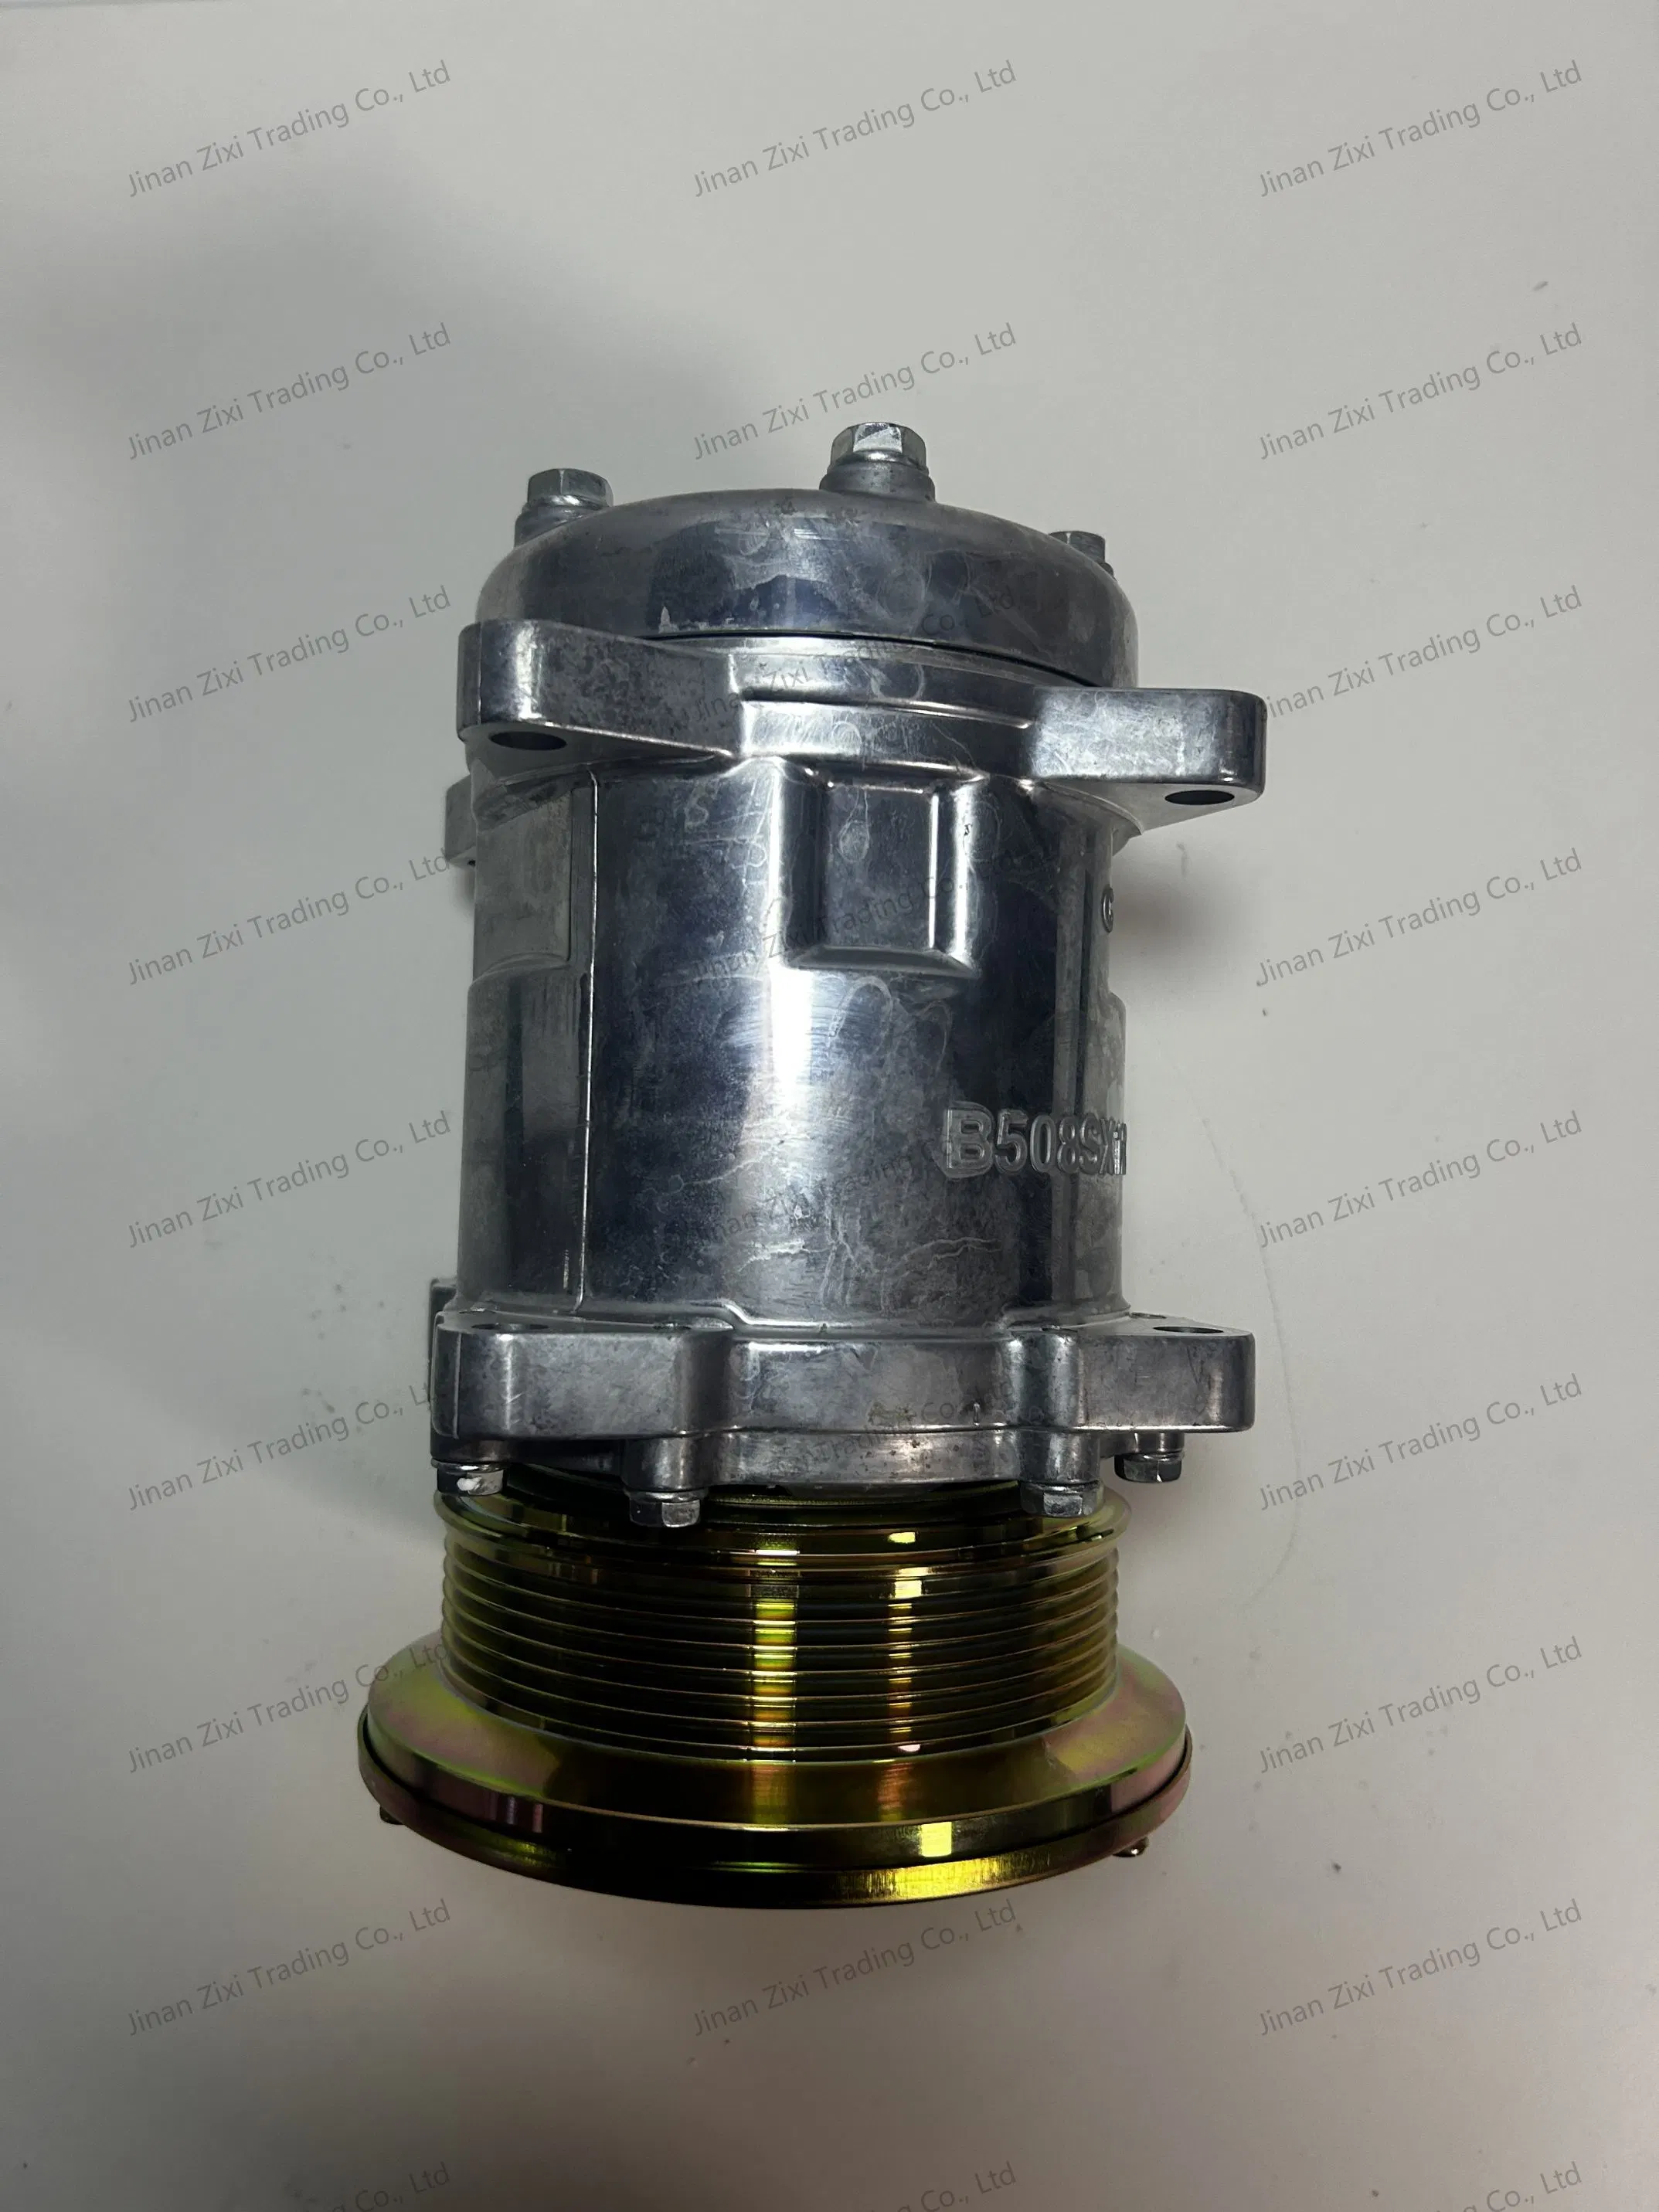 Wg1500139016 HOWO Dump Truck Parts Sinotruk HOWO Truck Spare Parts Air Conditioner Compressor